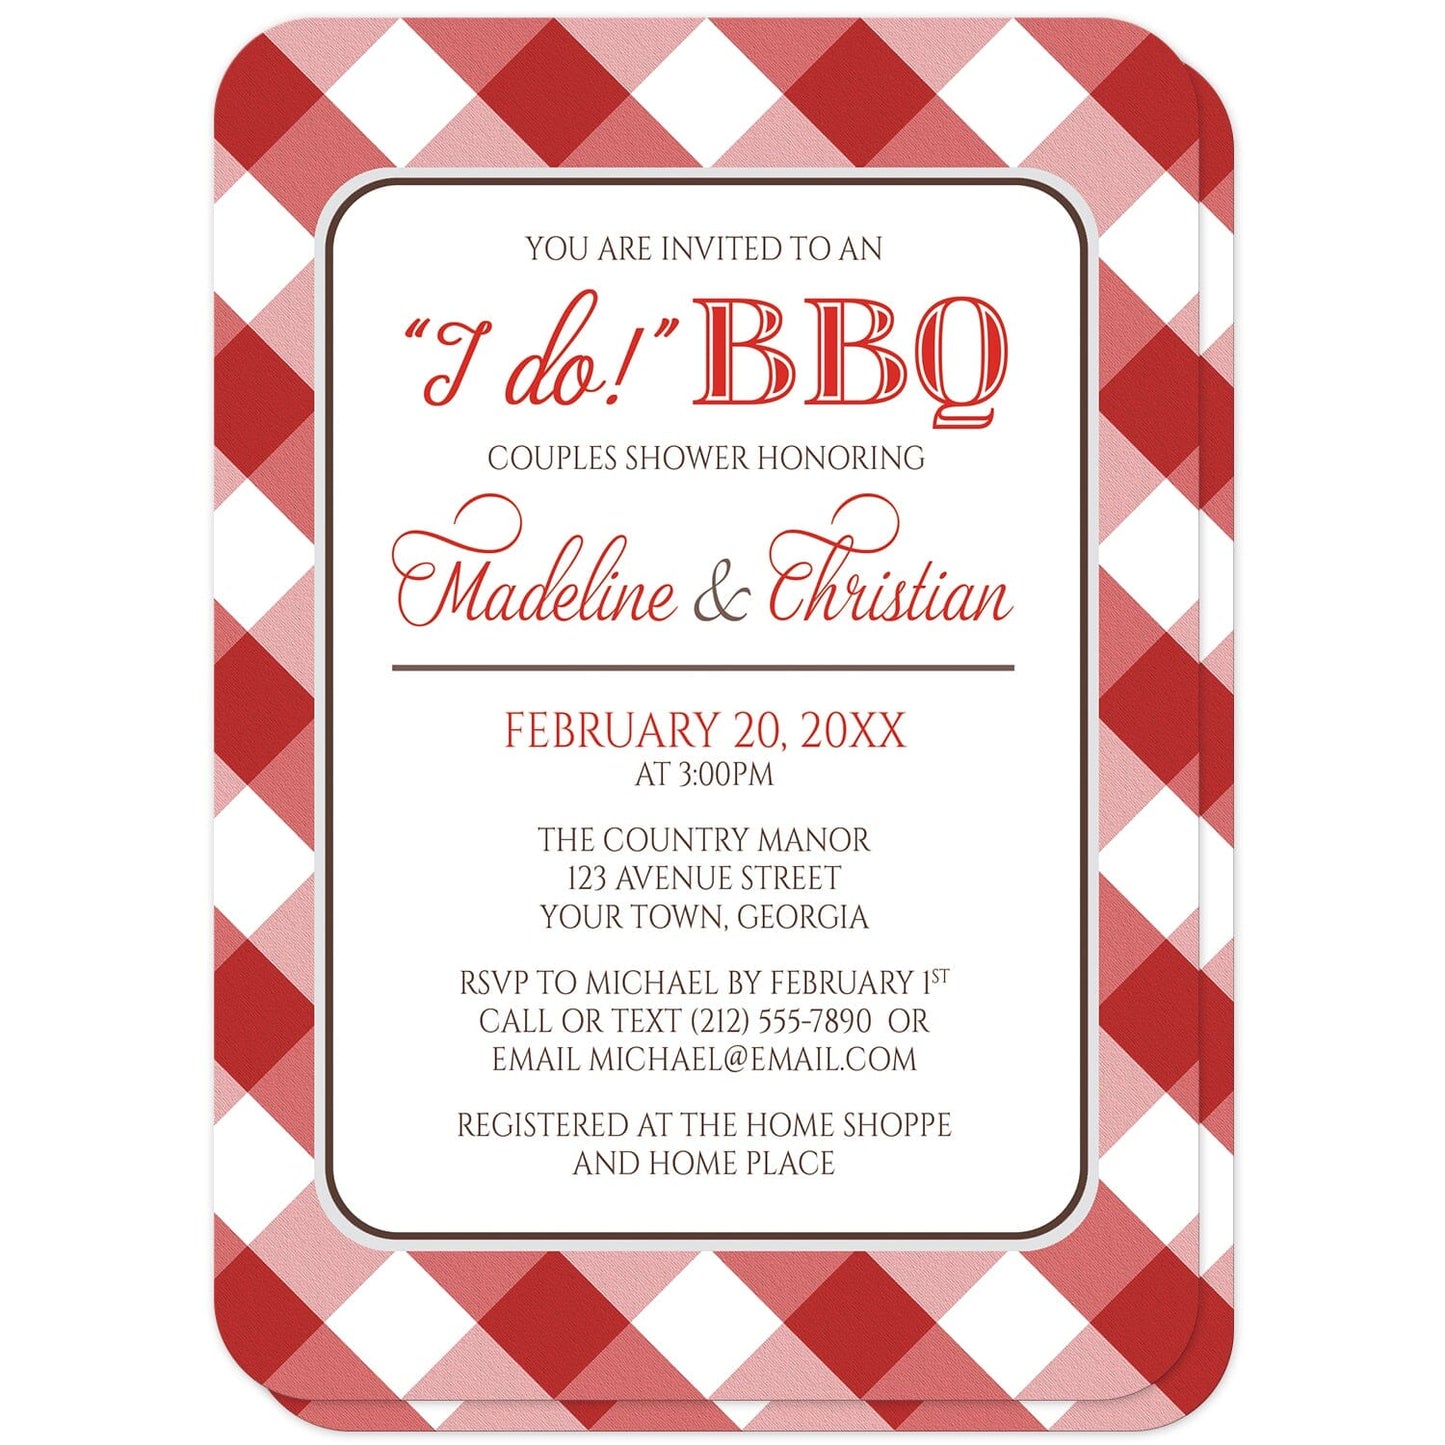 Red Gingham I Do BBQ Couples Shower Invitations (with rounded corners) at Artistically Invited. Red gingham I Do BBQ couples shower invitations with your celebration details in red and brown, in a white rounded corners frame, over a diagonal red and white gingham pattern background. The red and white gingham pattern, which is also printed on the back side, gives these I Do BBQ couples shower invitations a rustic or southern feel, while the text is printed in modern fonts.